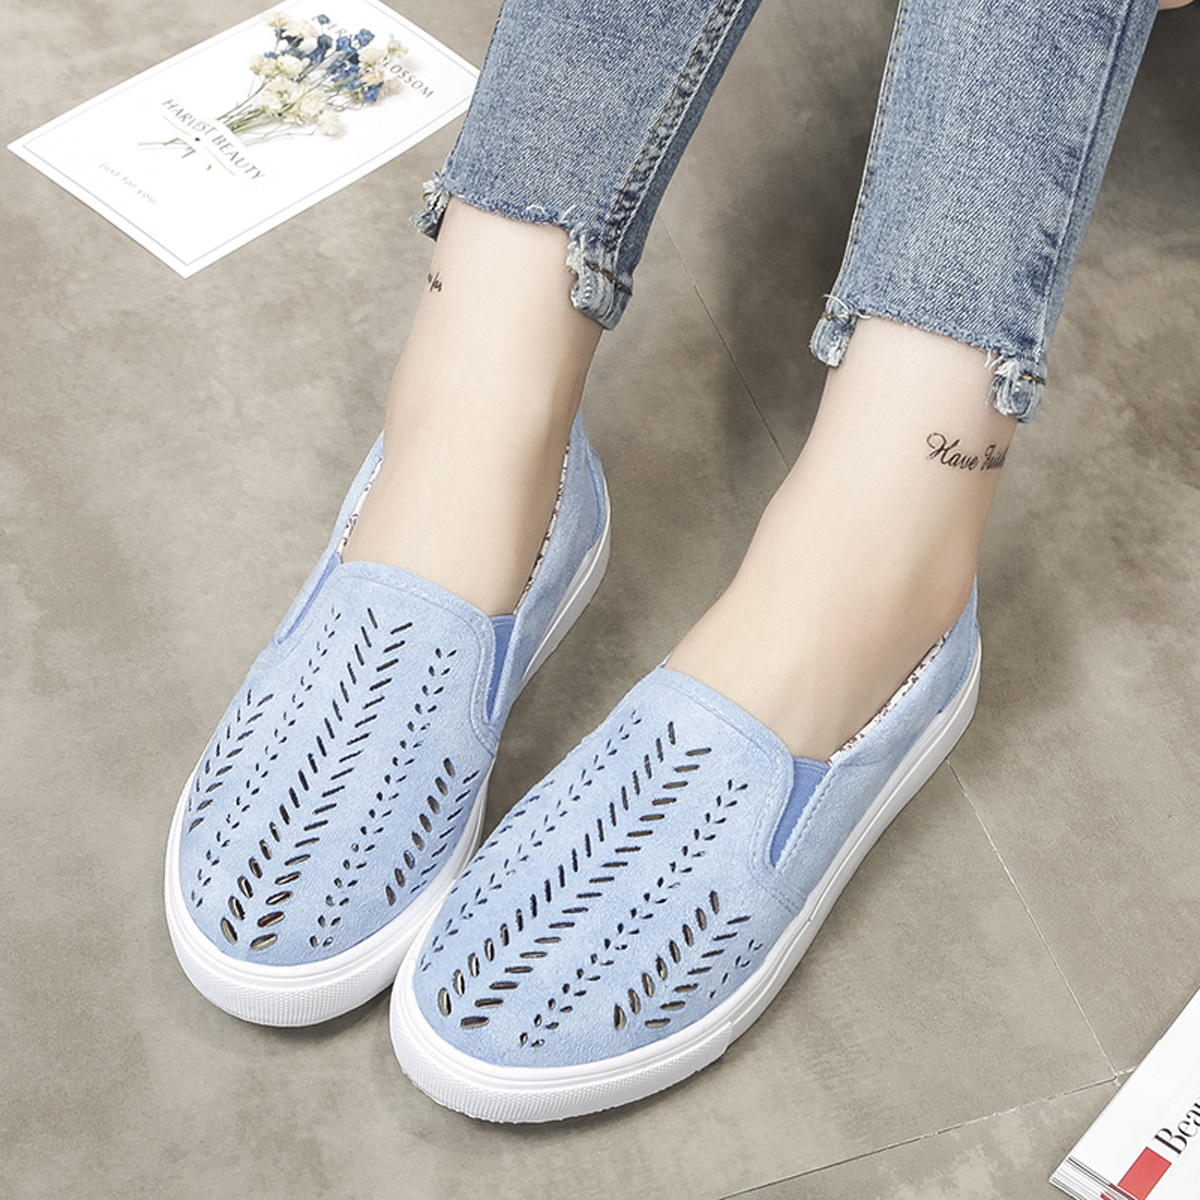 

Large Size Hollow Out Slip On Casual Flats Loafers